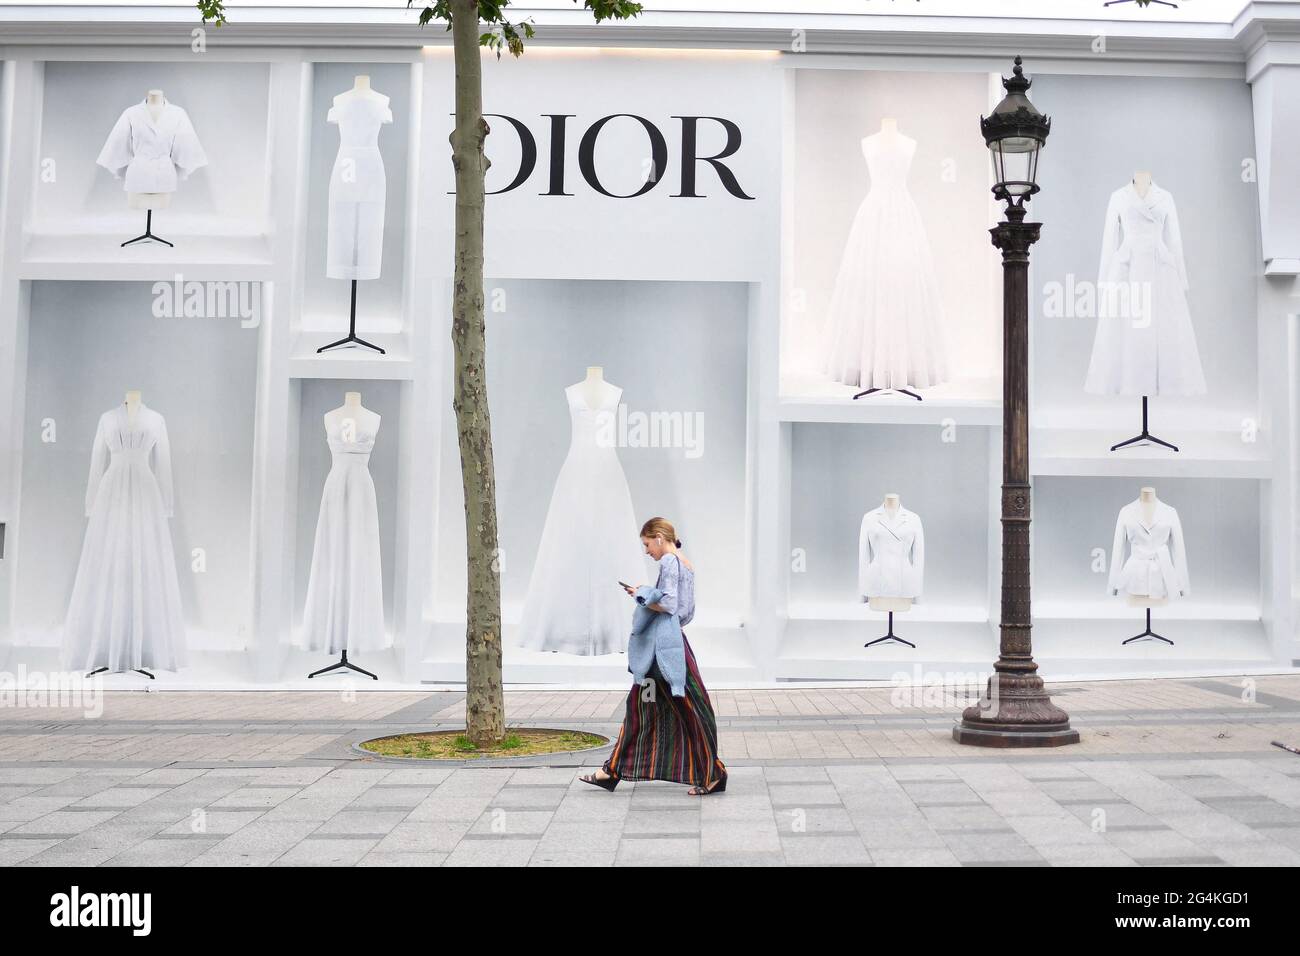 A Cultural Gift to Paris Could Redesign LVMH's Image - The New